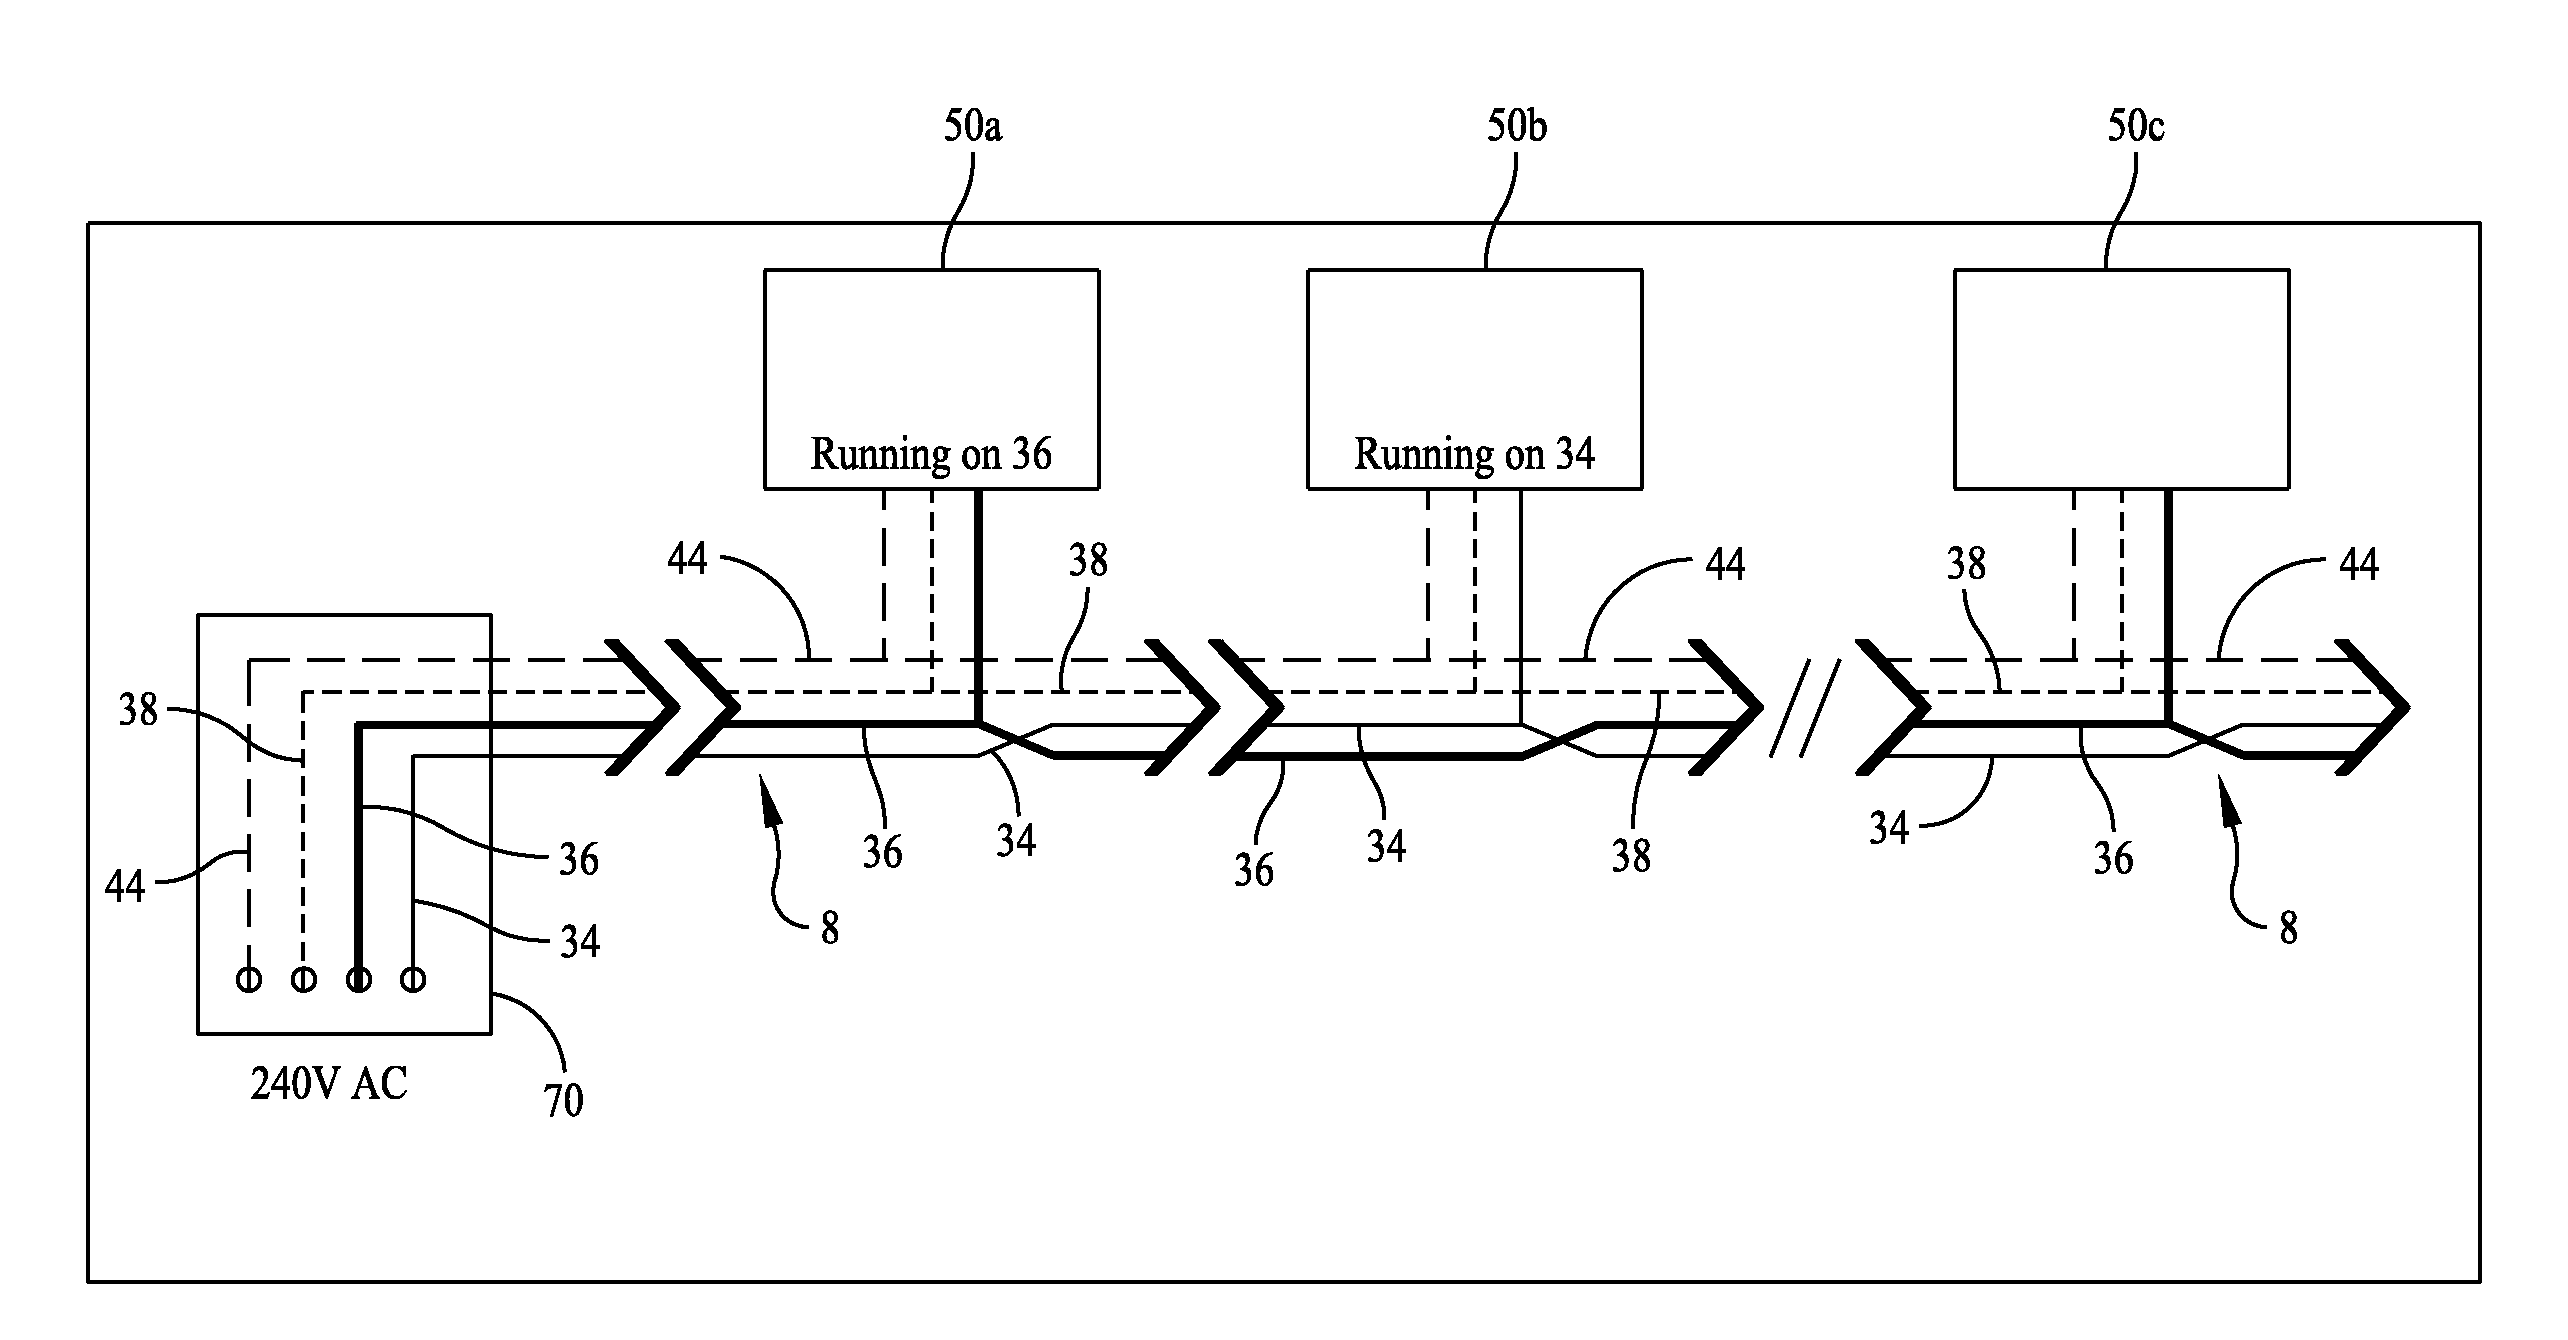 Electrical cable harness and assembly for transmitting ac electrical power